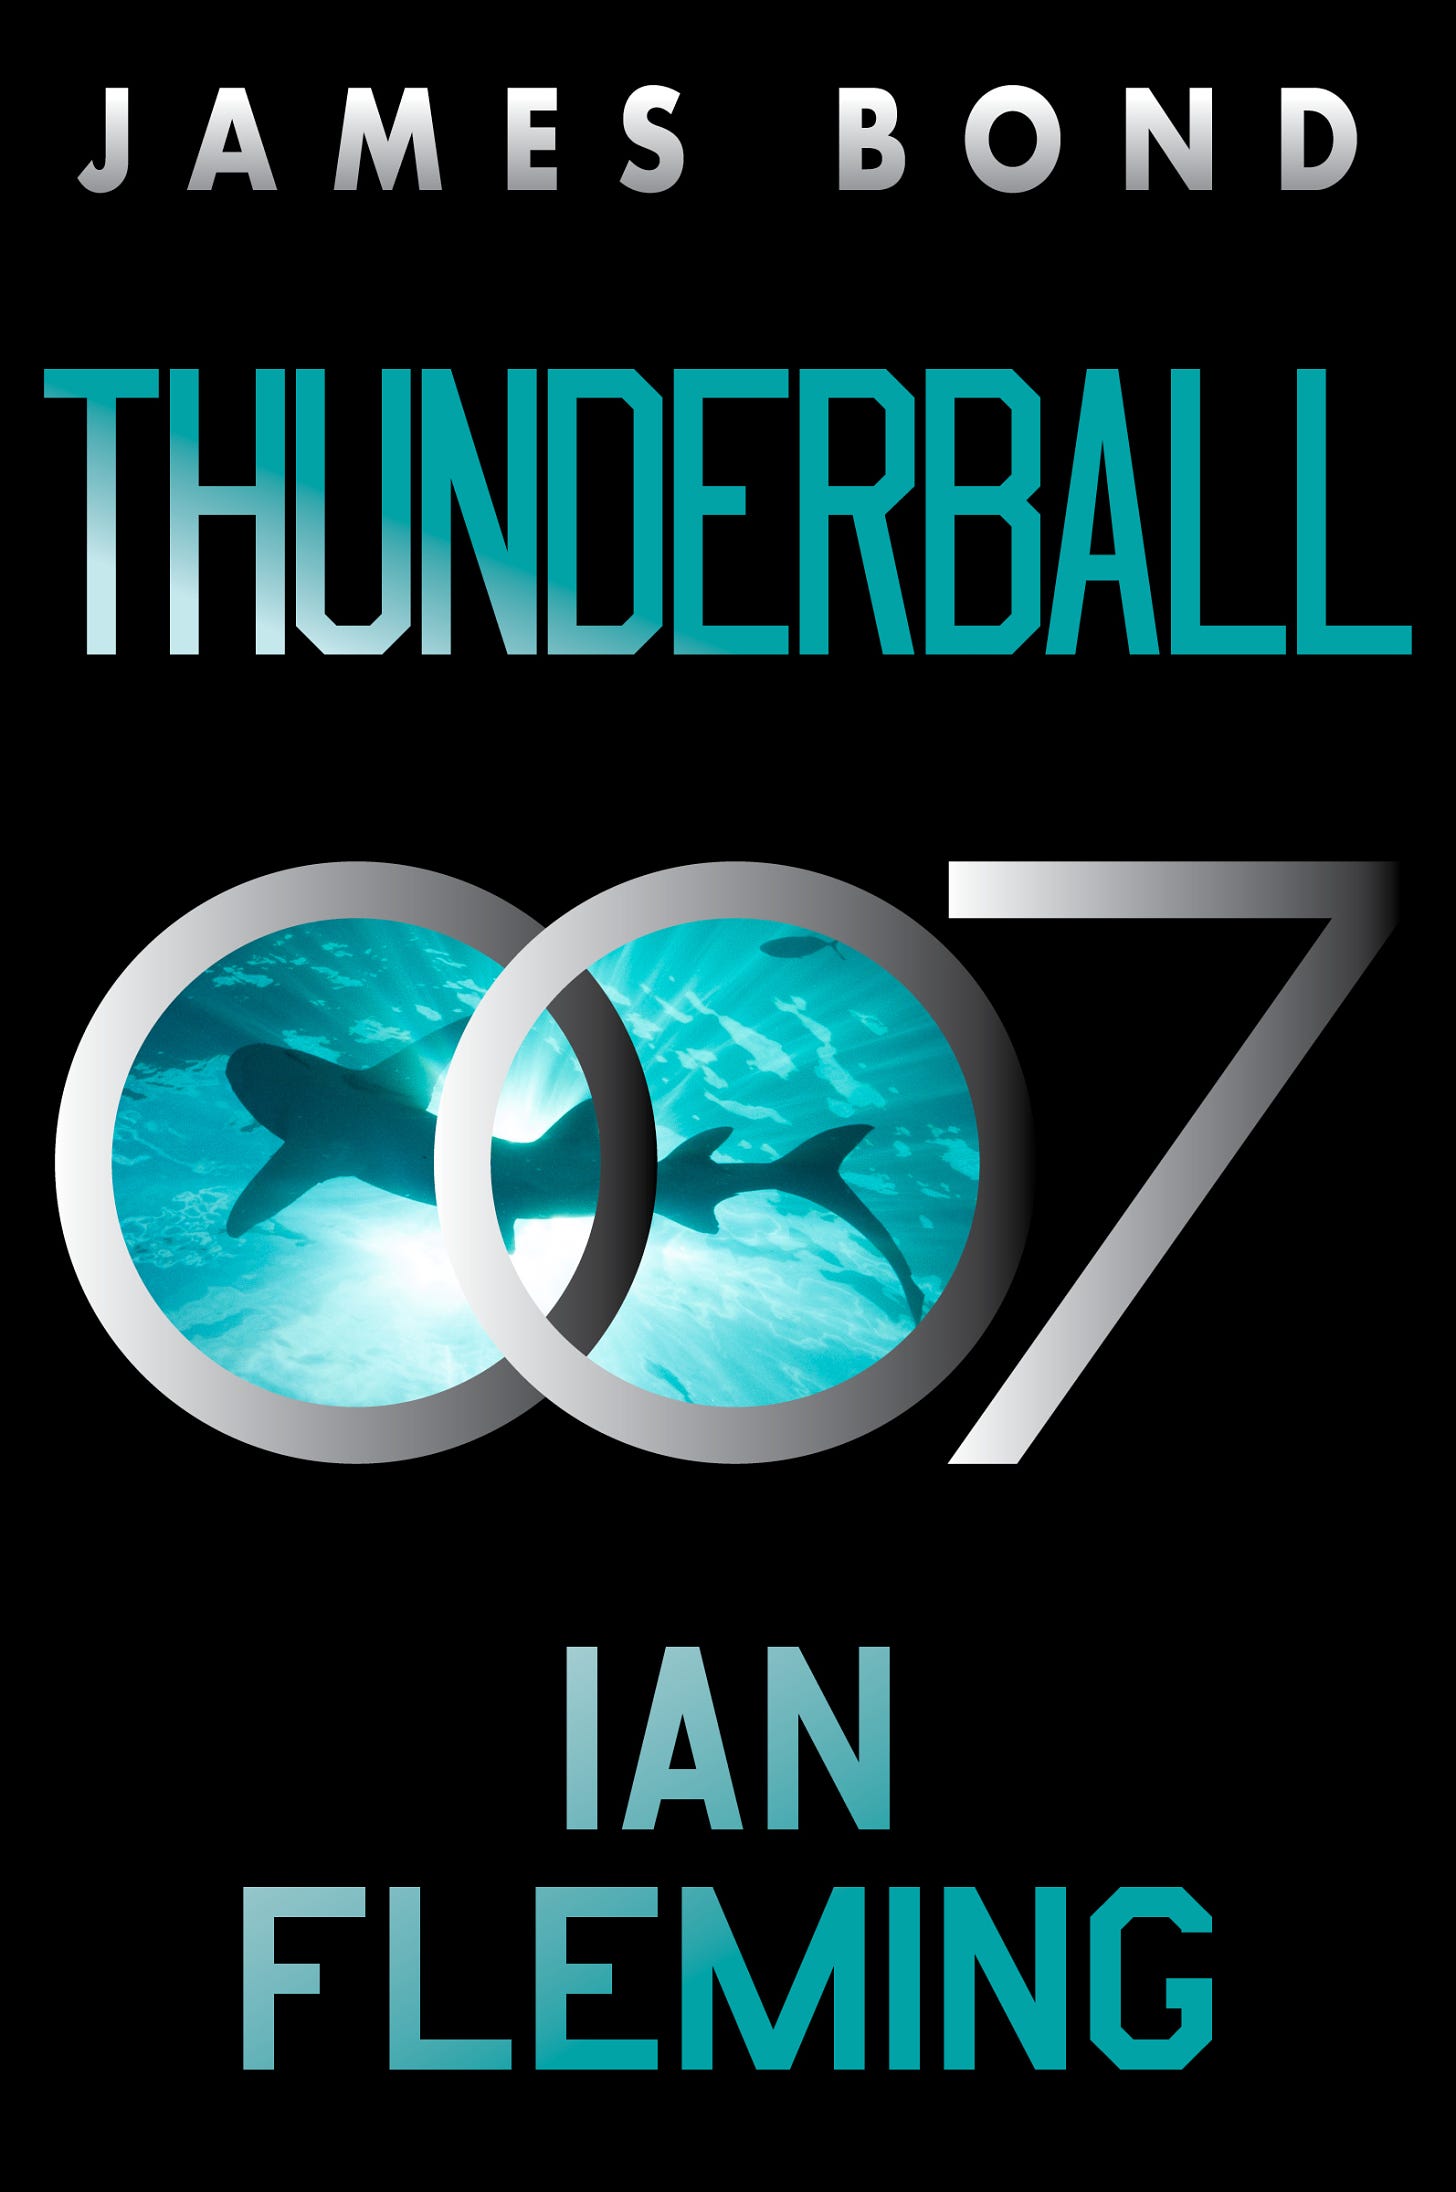 Thunderball by Ian Fleming 70th Anniversary US Paperback Edition